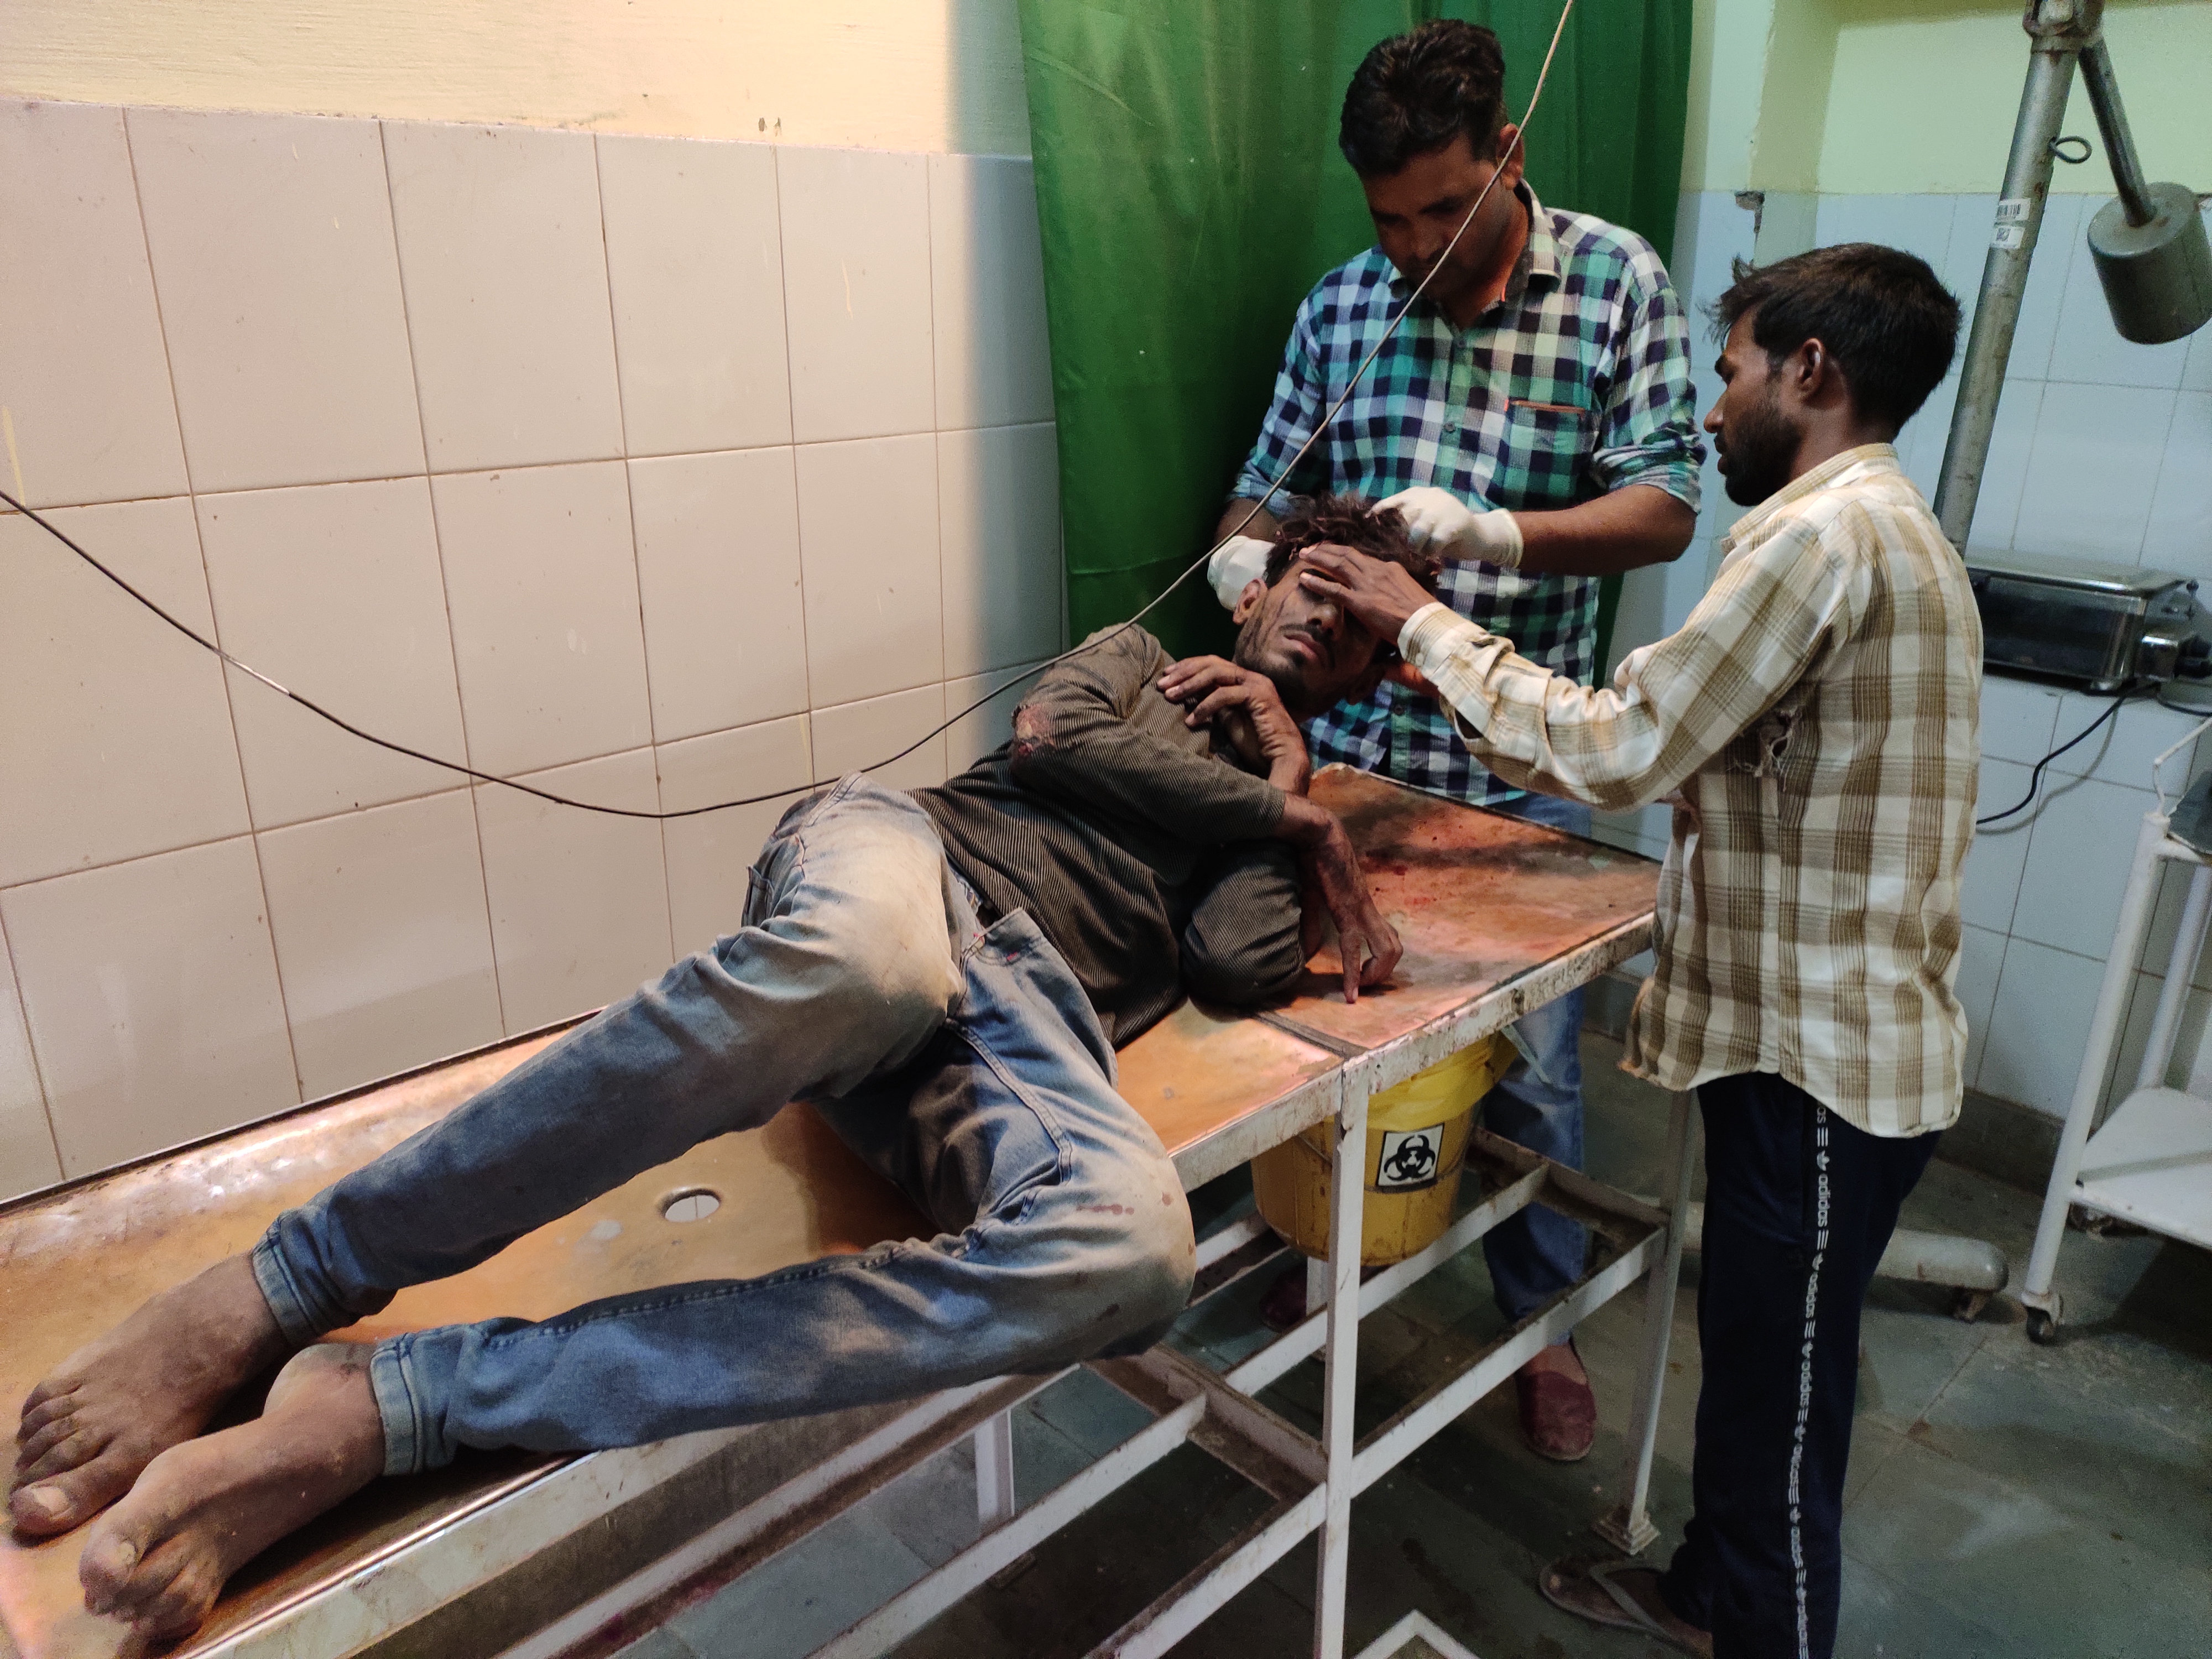 Incident: Youth severely injured by train from sleeping nap